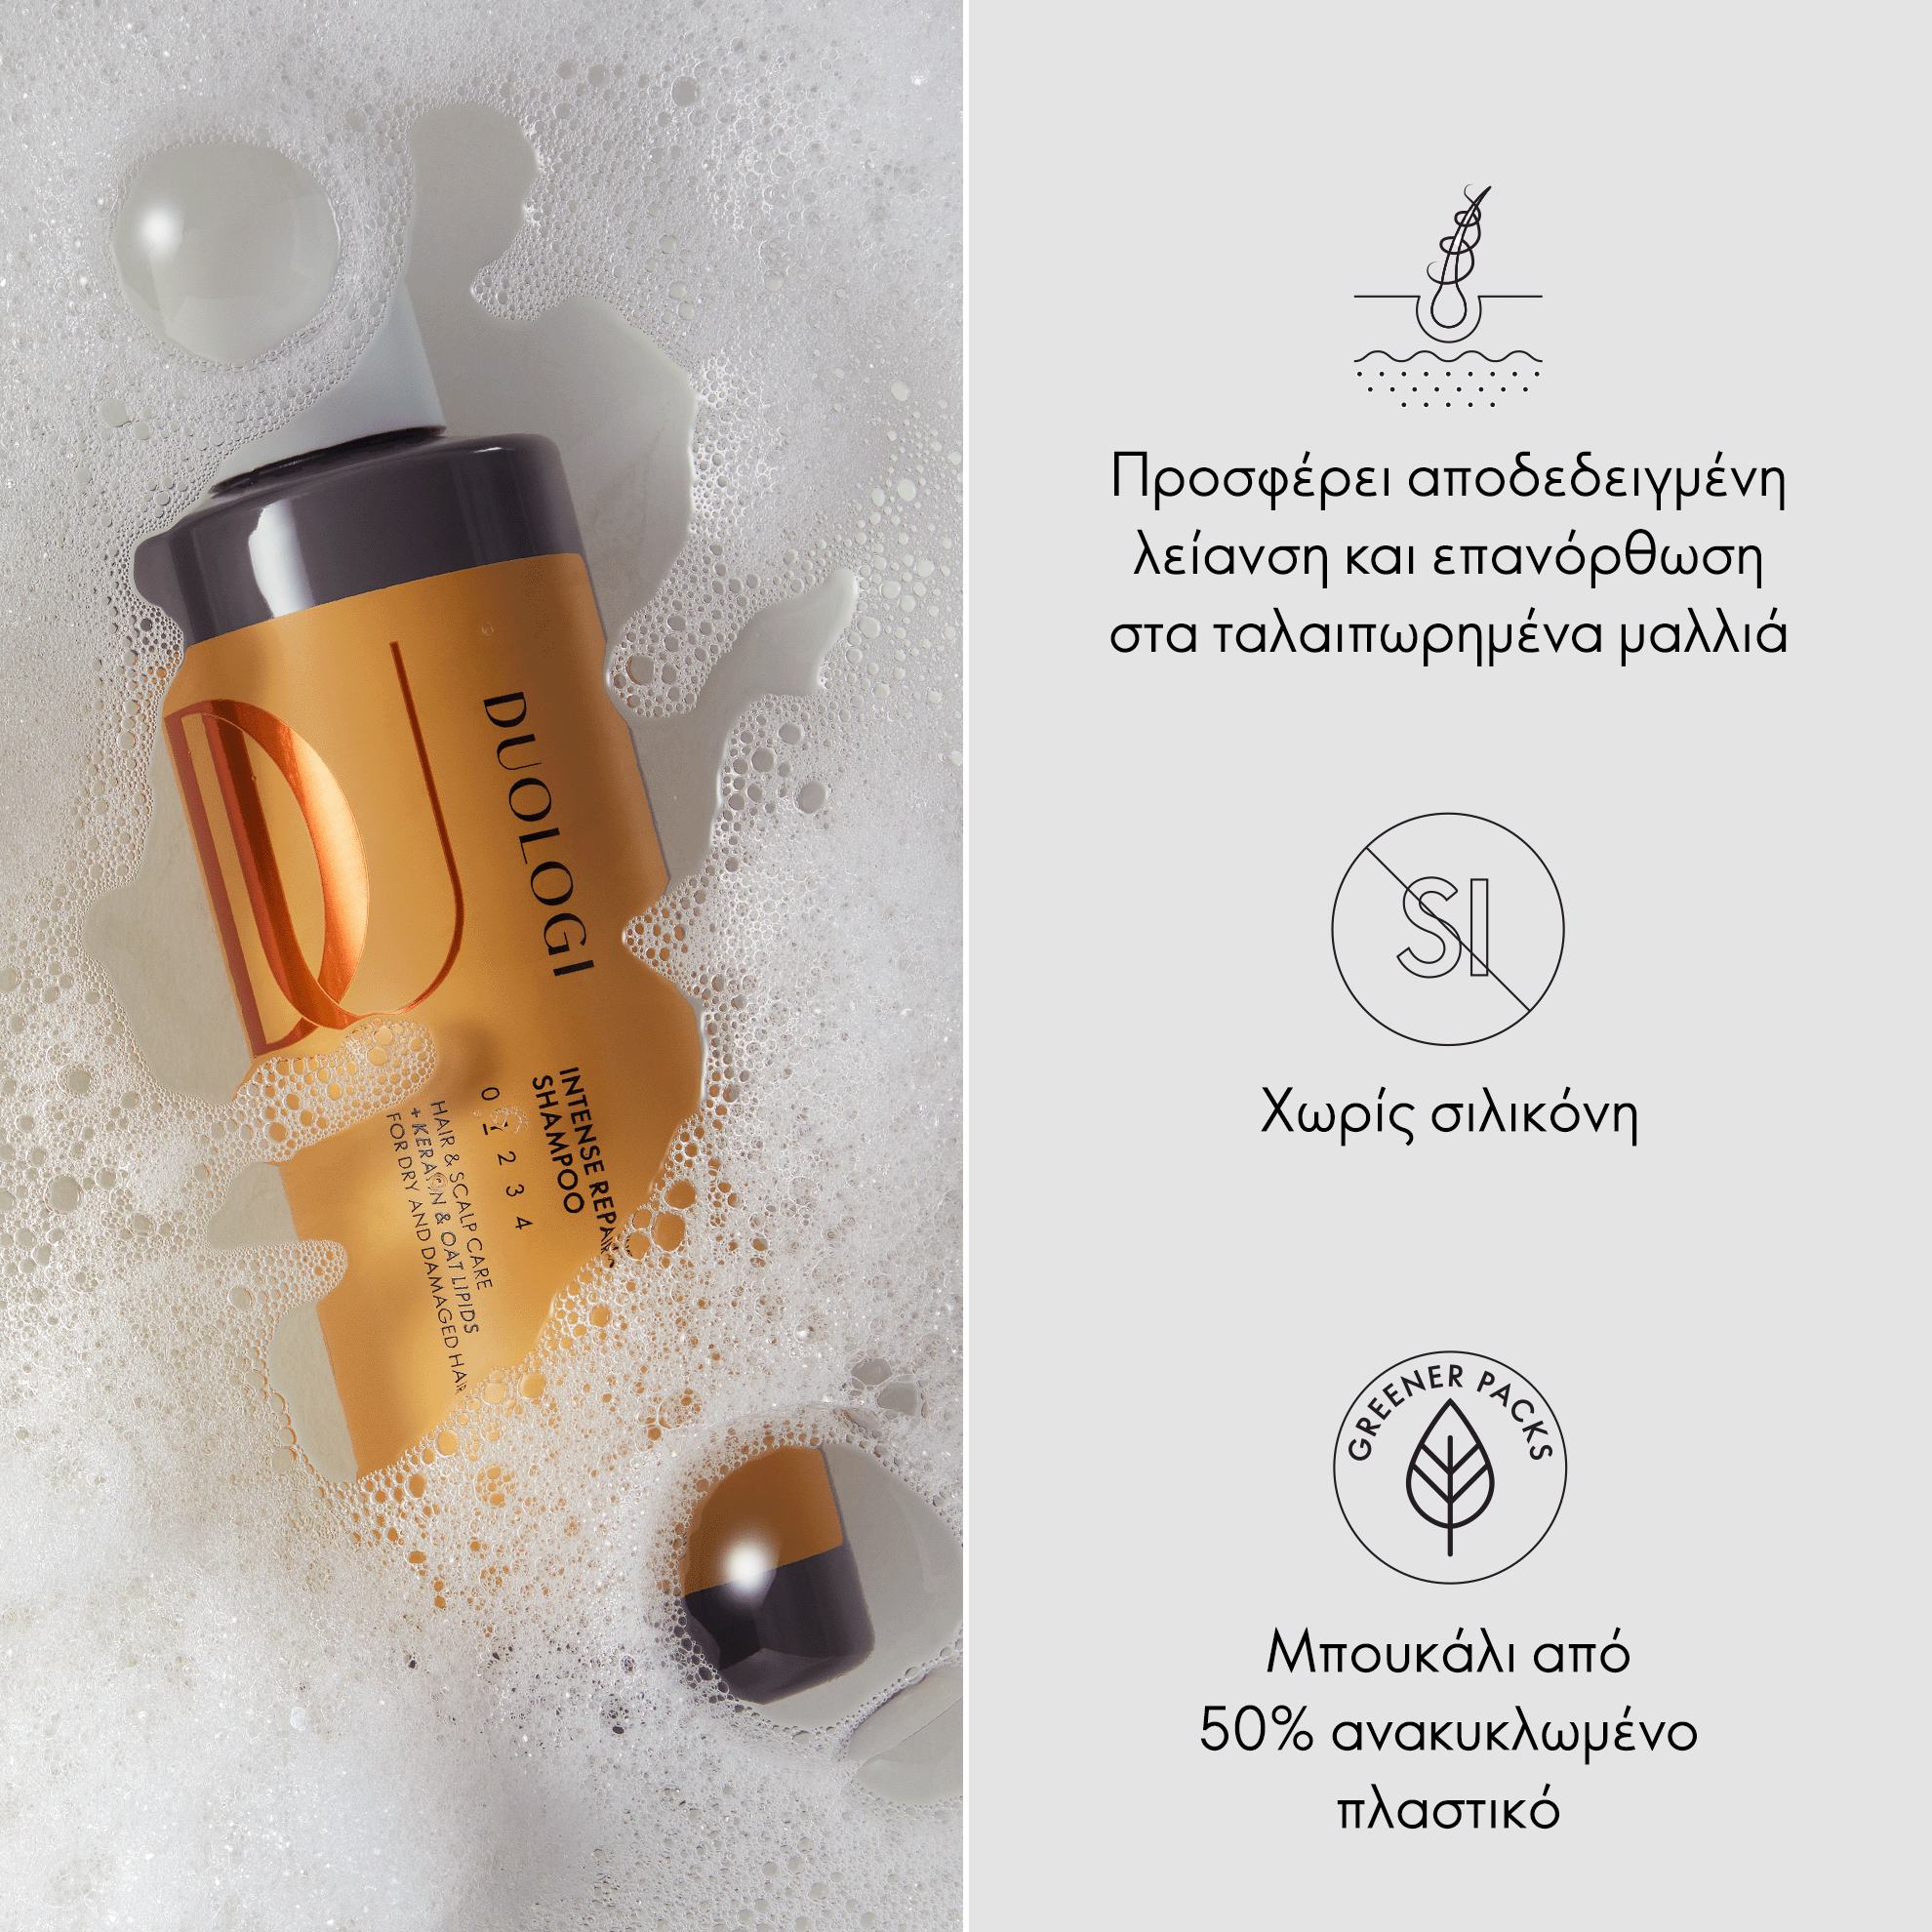 https://media-cdn.oriflame.com/productImage?externalMediaId=product-management-media%2fProducts%2f44950%2fGR%2f44950_5.png&id=17884084&version=1